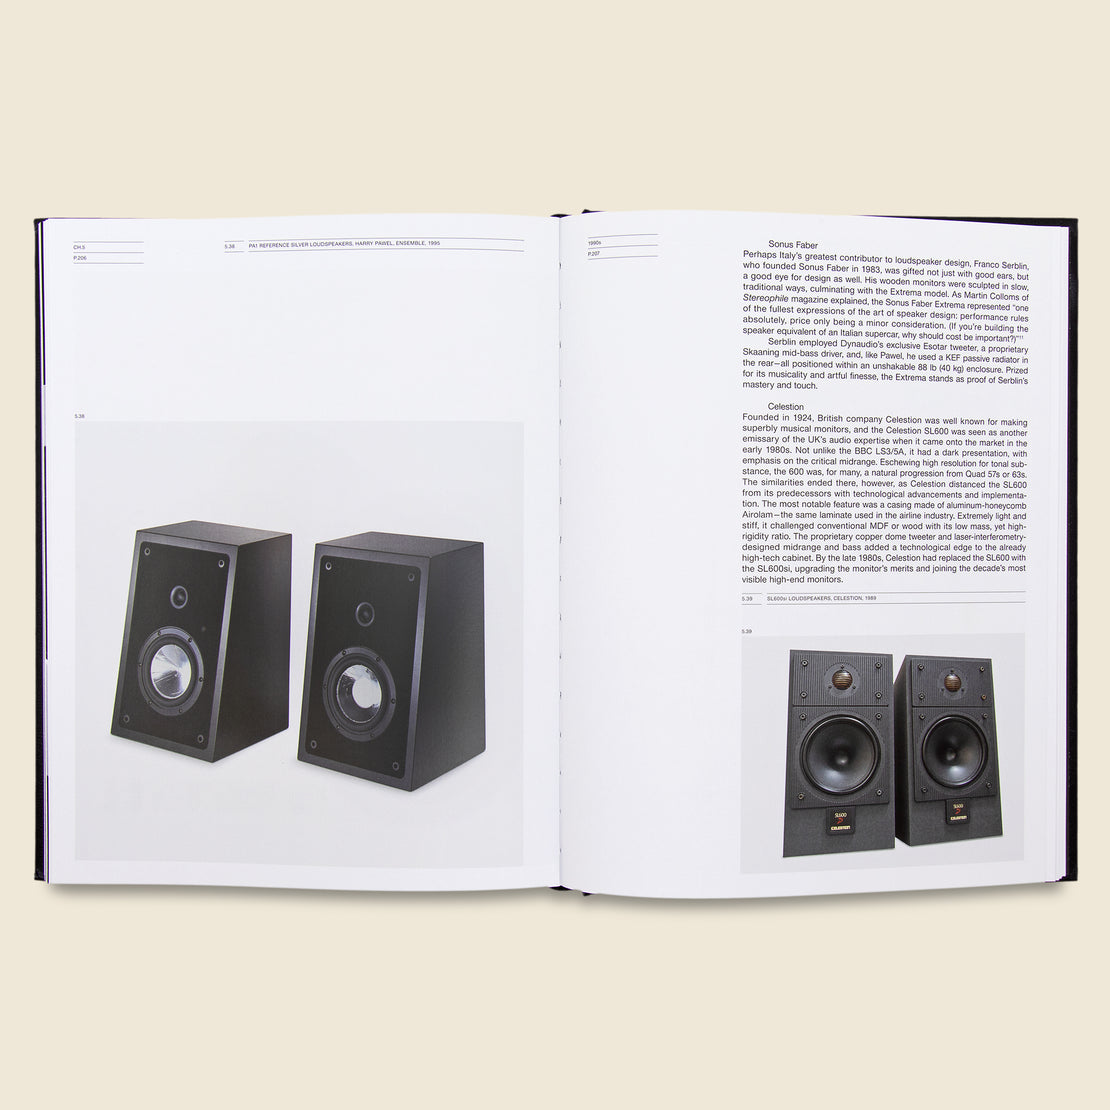 Hi-Fi: The History of High-End Audio Design - Bookstore - STAG Provisions - Home - Library - Book